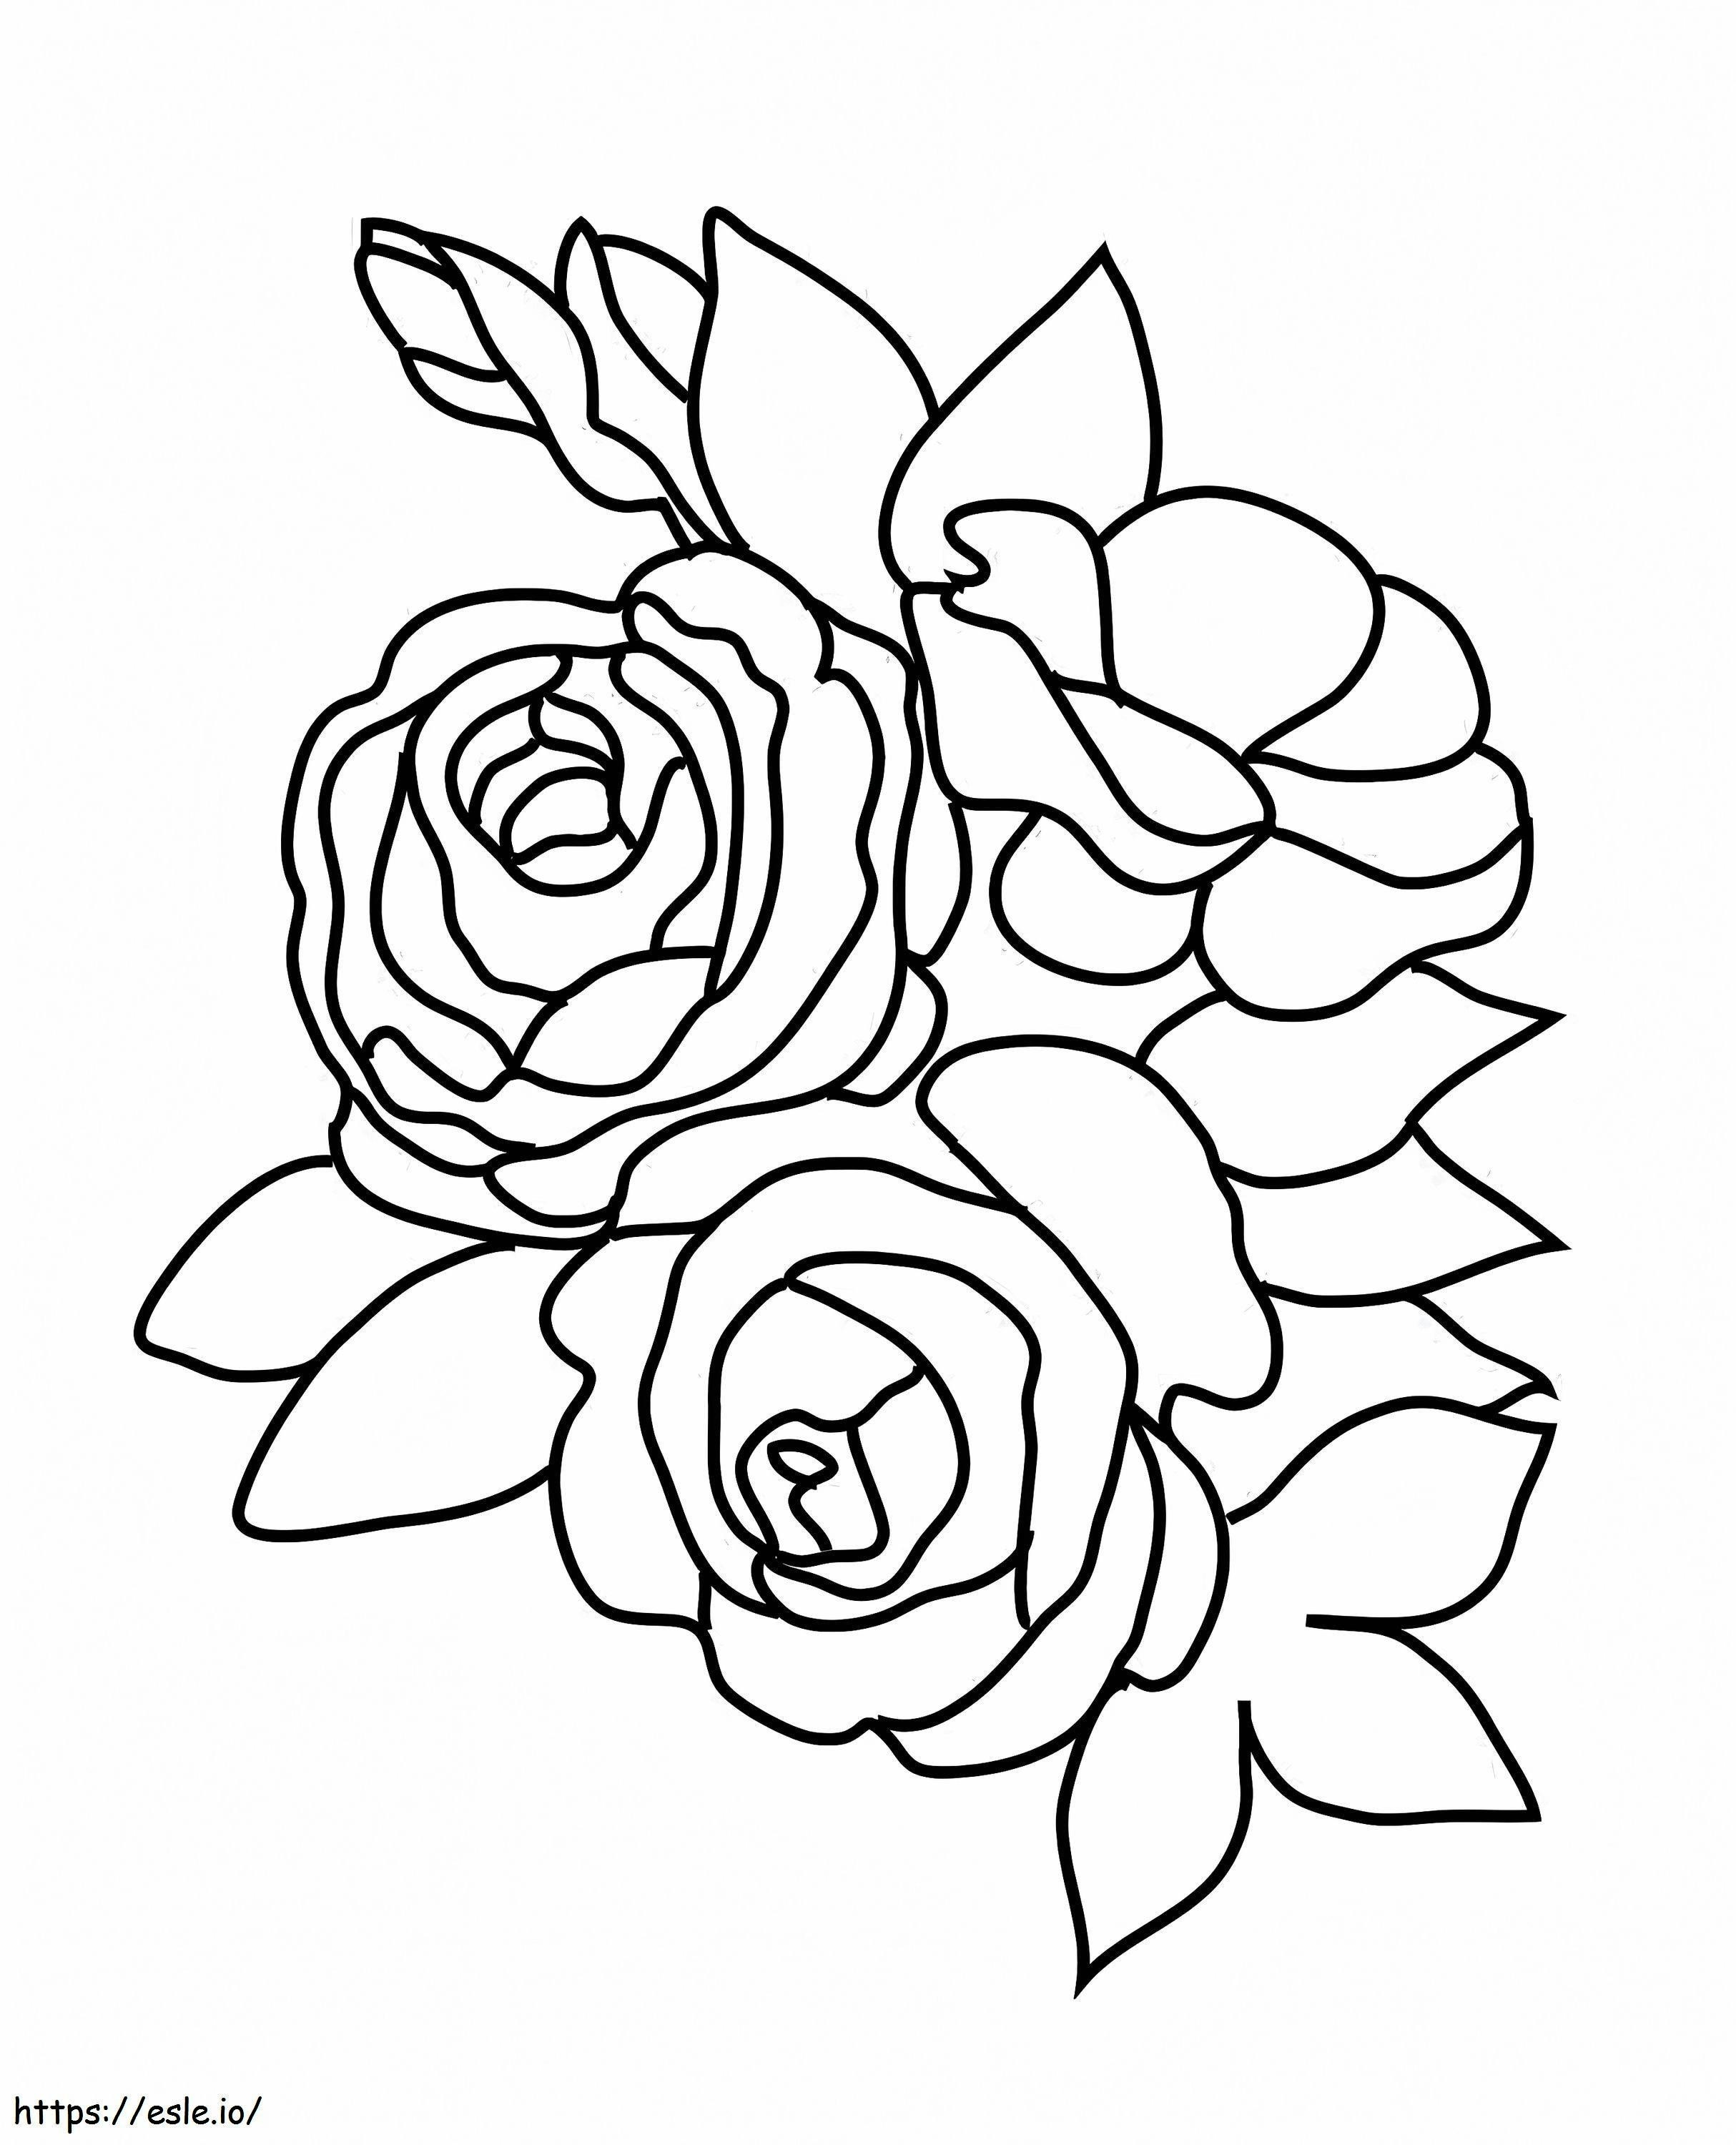 Drawing And Coloringges Flower Outstanding Three Roses Leaves Kaiju For Kids Dbs coloring page